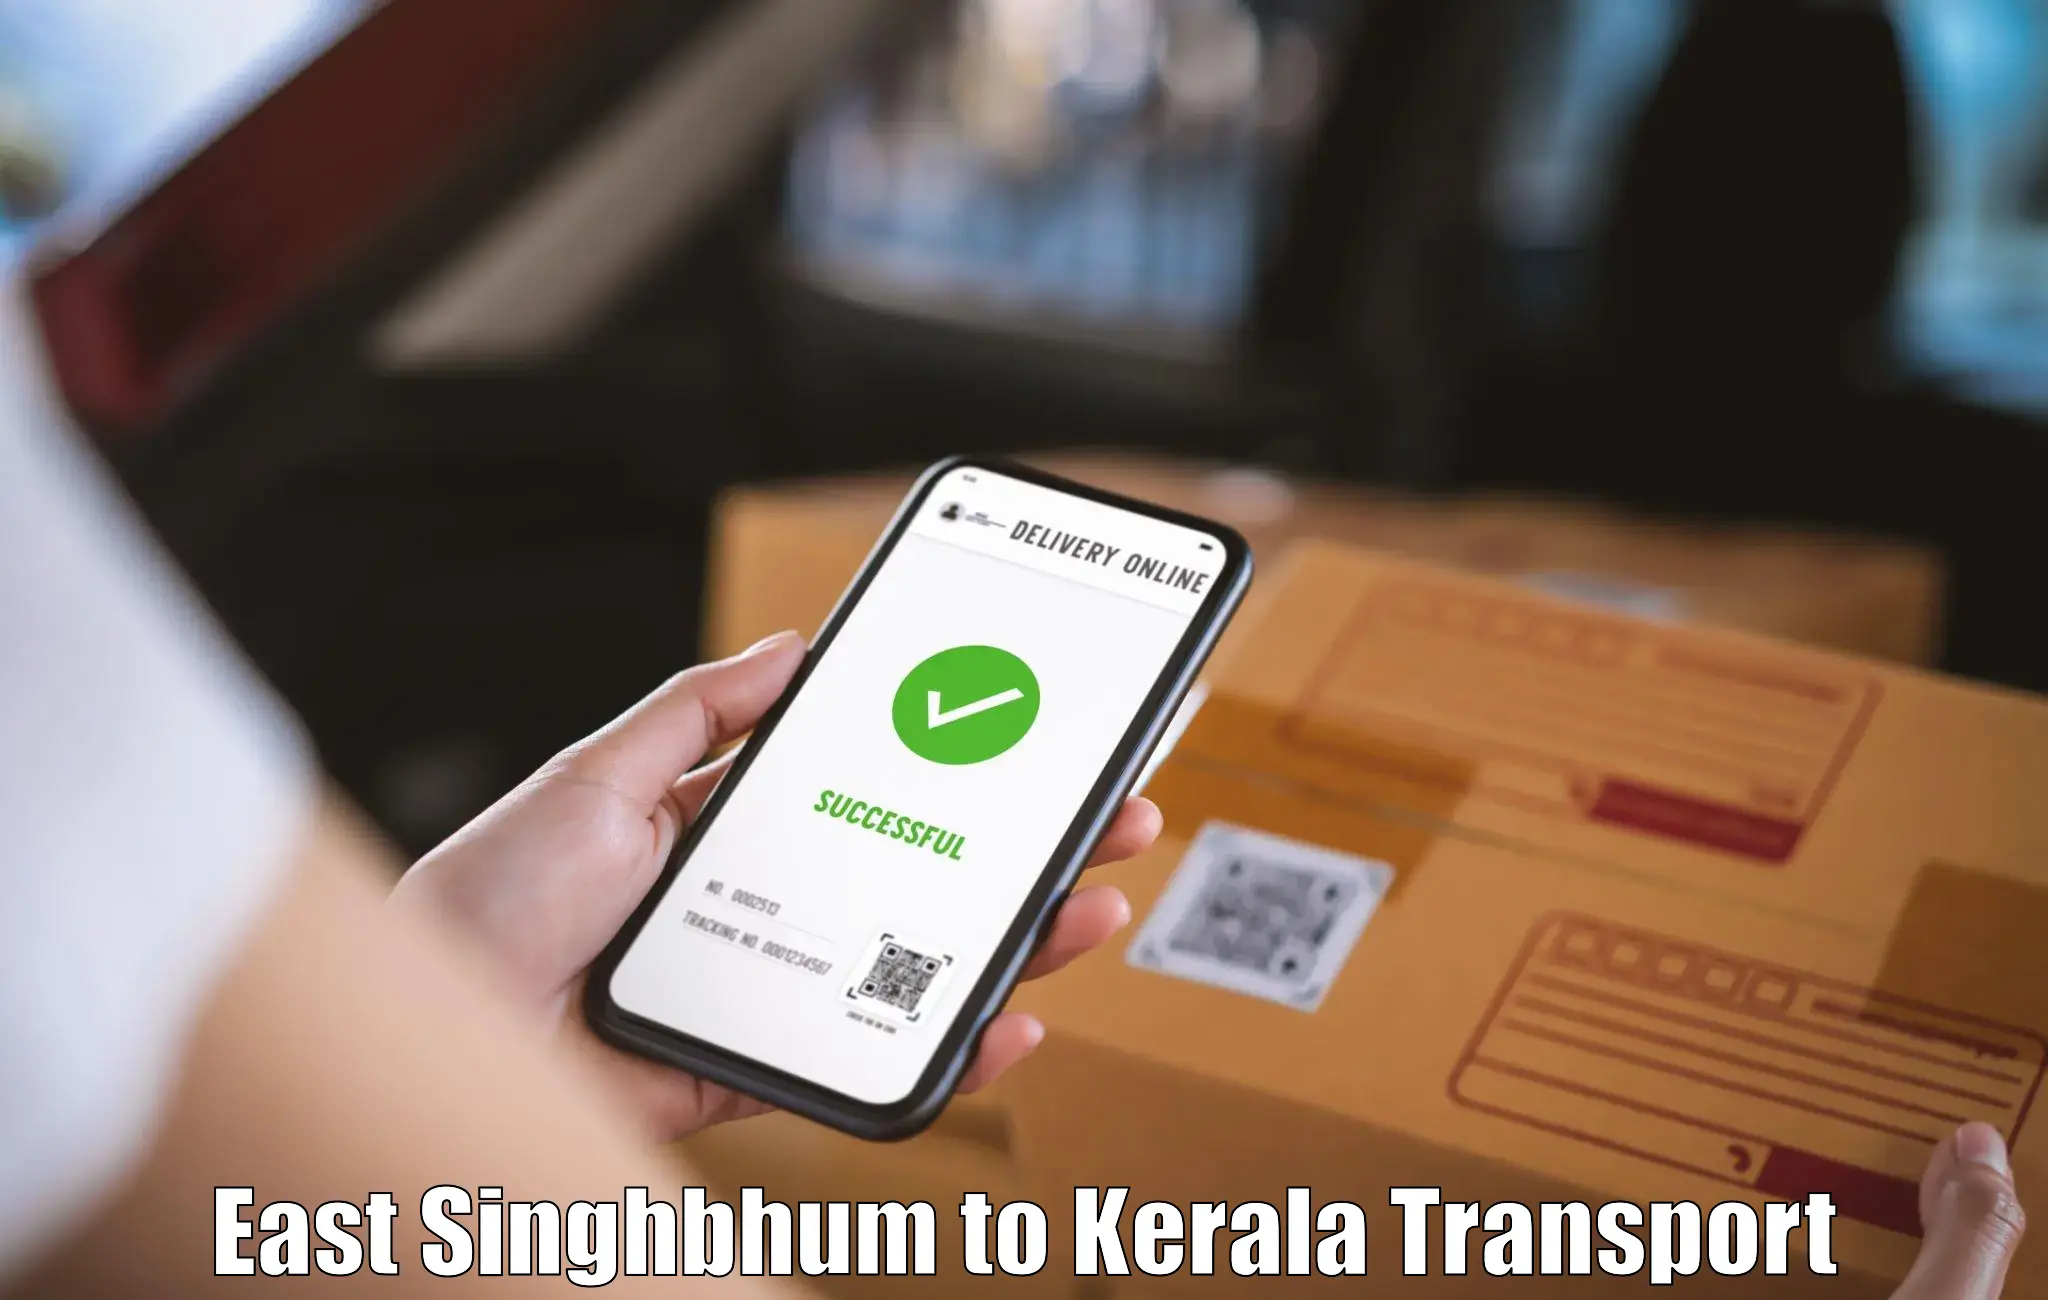 Package delivery services East Singhbhum to Pandikkad